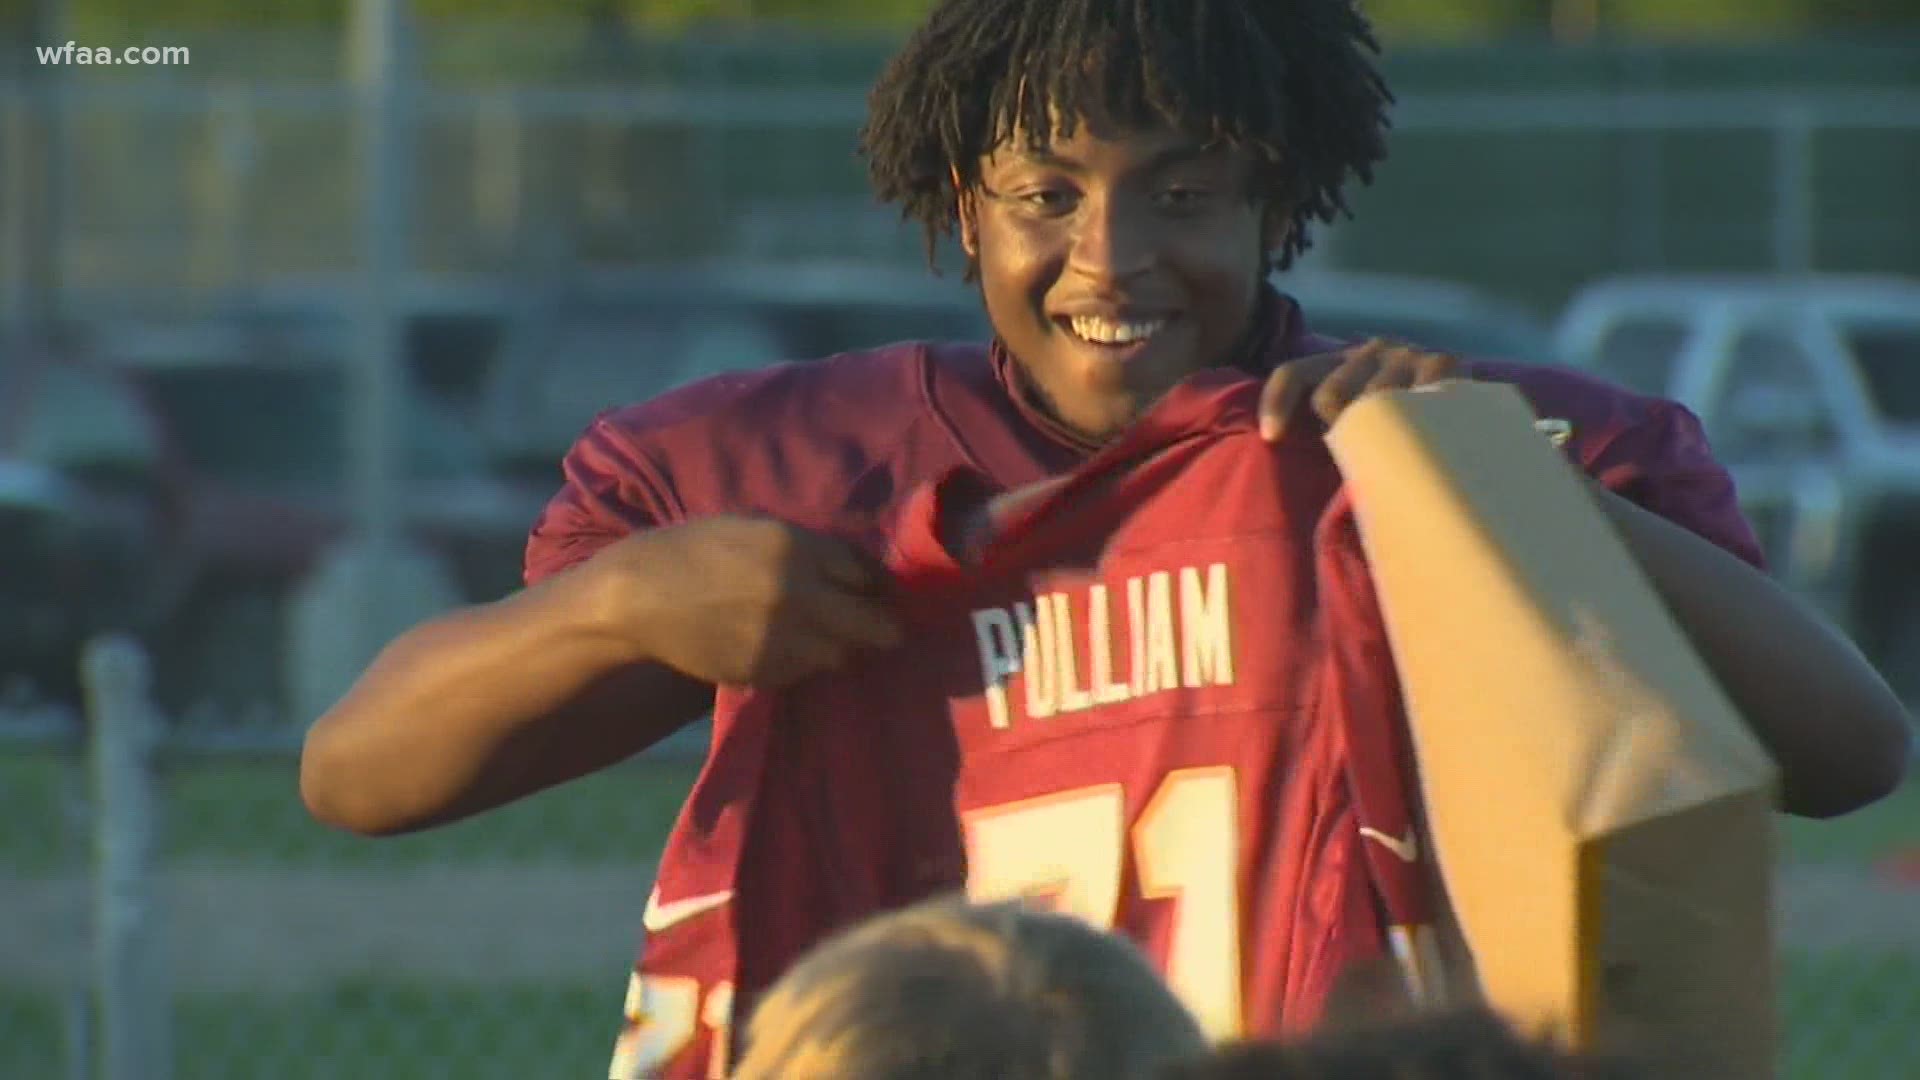 The Washington Football Team is congratulating a high school player on his first ever touchdown.